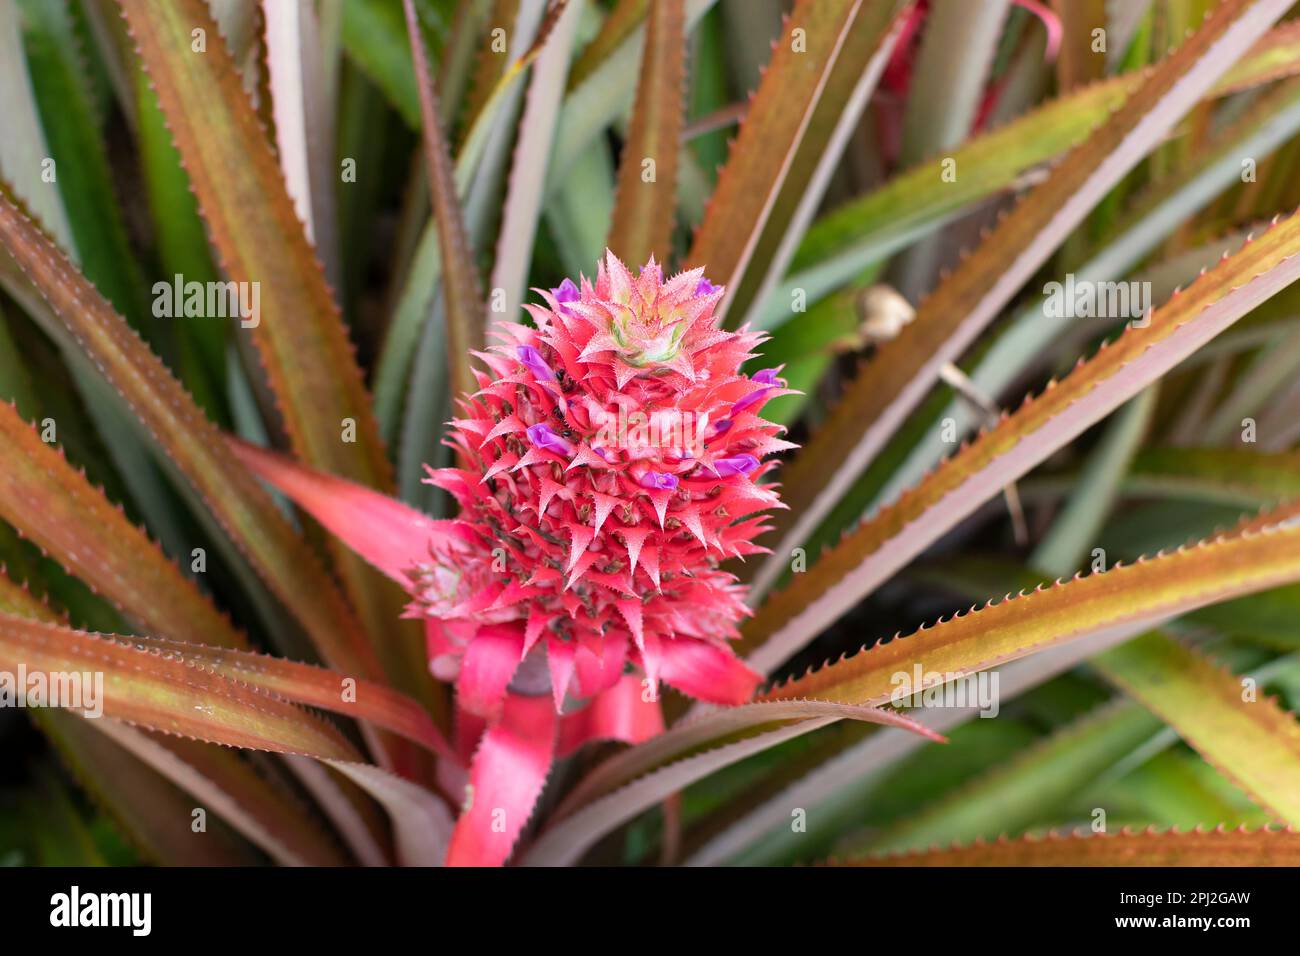 Ornamental pink pineapple plant. Close-up Pineapple flower Aechmea fasciata (silver vase, urn plant) blossom with green leaves nature background Stock Photo